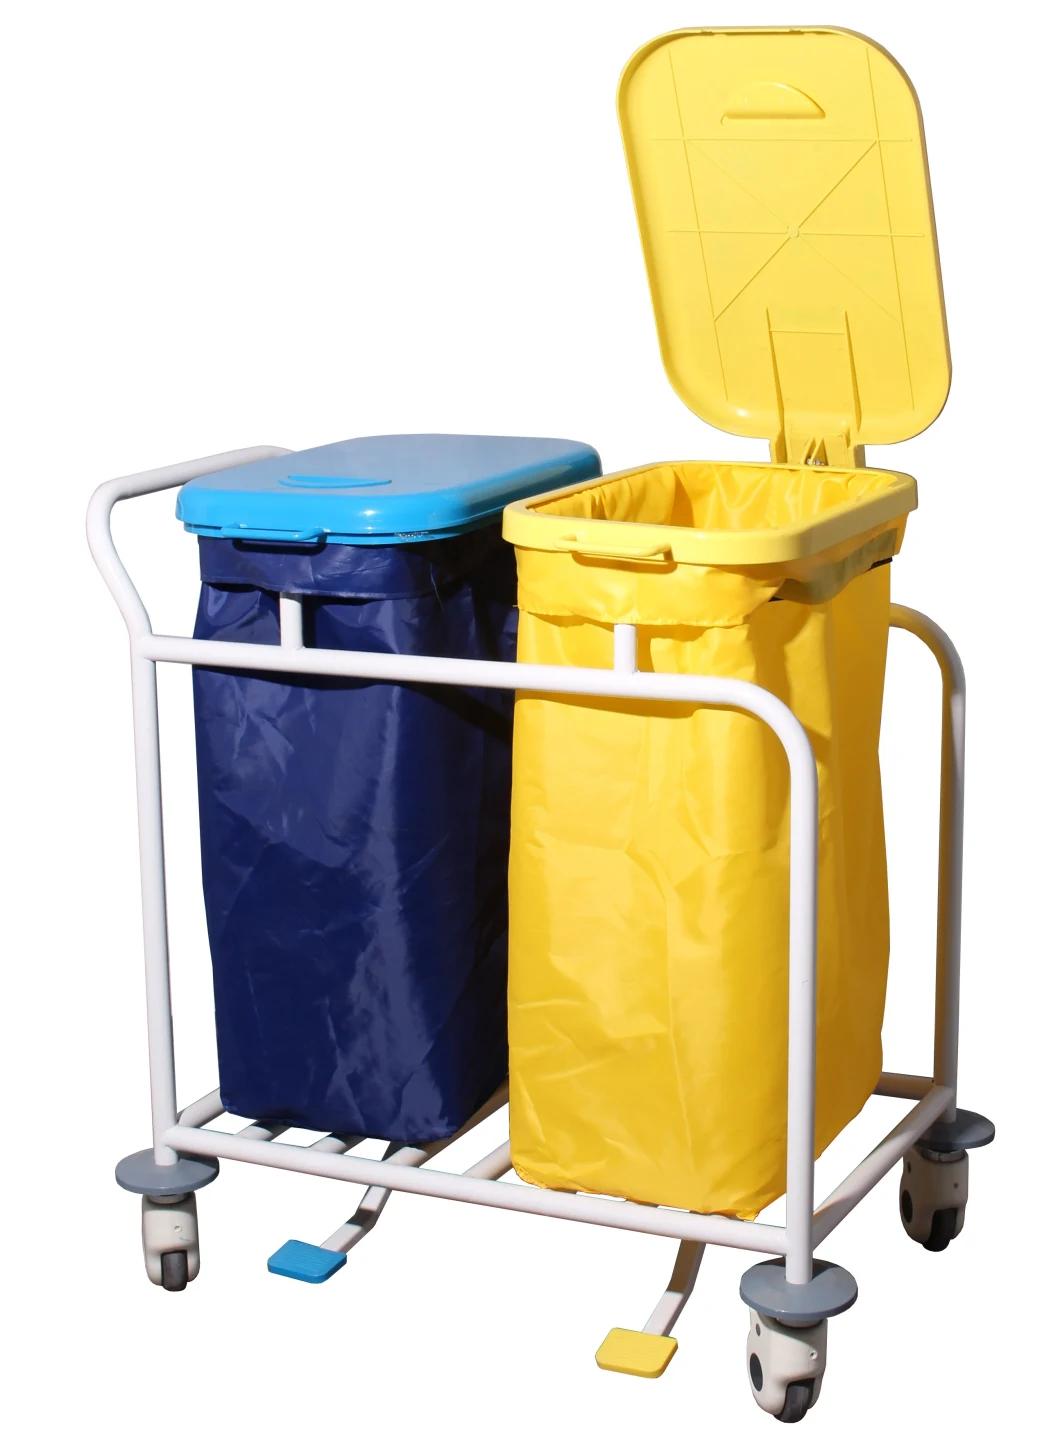 Medical Blue/Yellow Color Single Bins Hospital Linen Dirty Carts and Trolleys Pedal Type